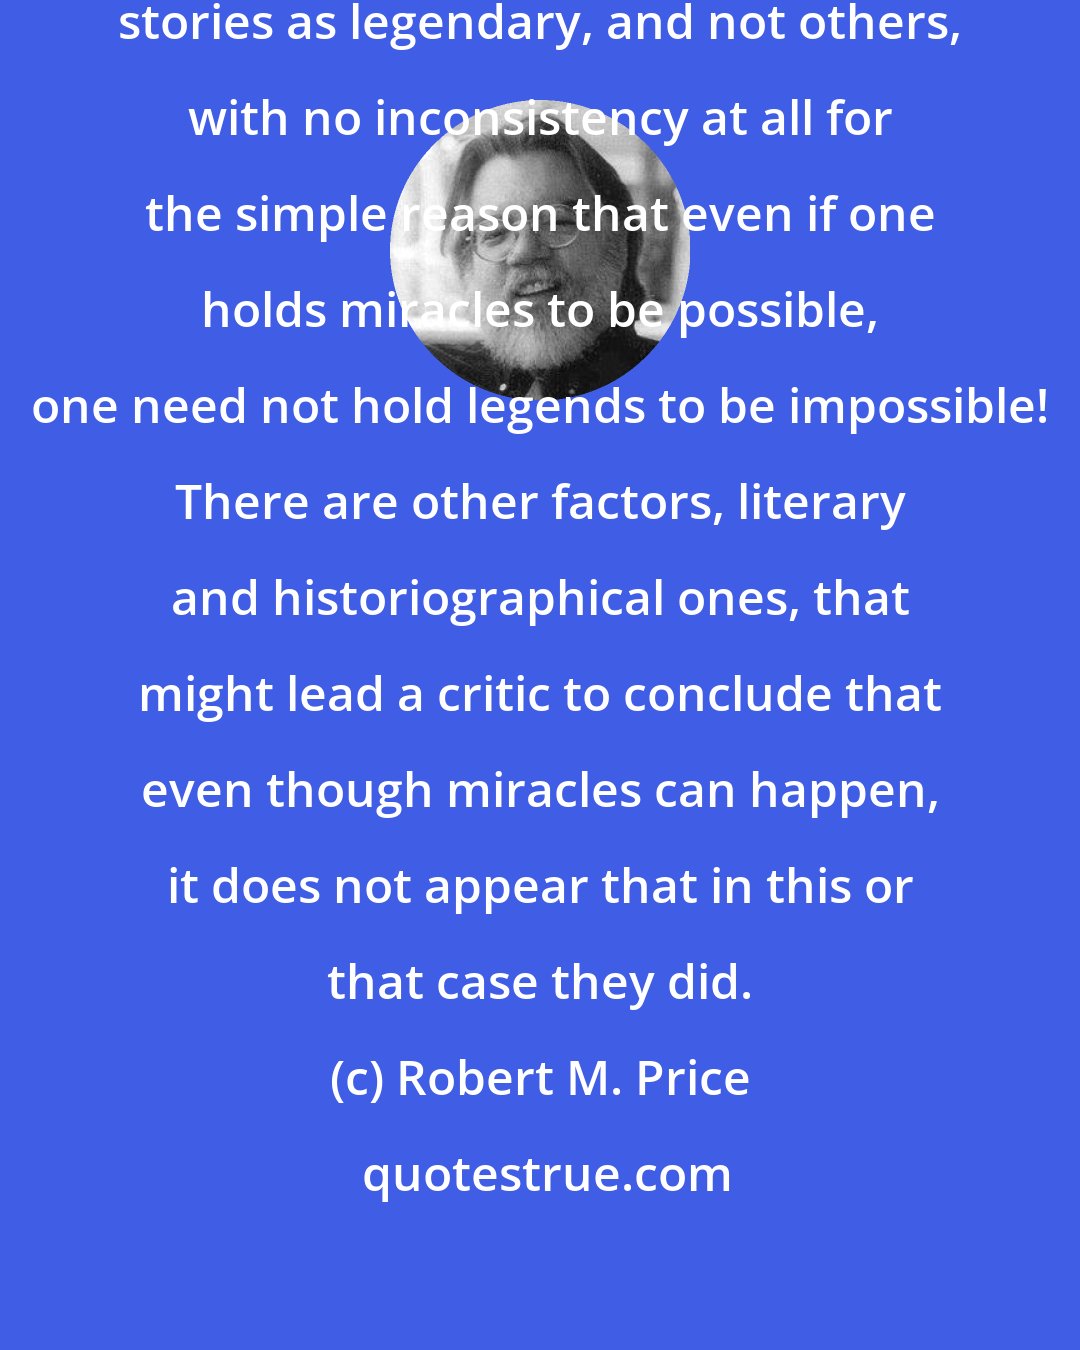 Robert M. Price: A critic may reject some miracle stories as legendary, and not others, with no inconsistency at all for the simple reason that even if one holds miracles to be possible, one need not hold legends to be impossible! There are other factors, literary and historiographical ones, that might lead a critic to conclude that even though miracles can happen, it does not appear that in this or that case they did.